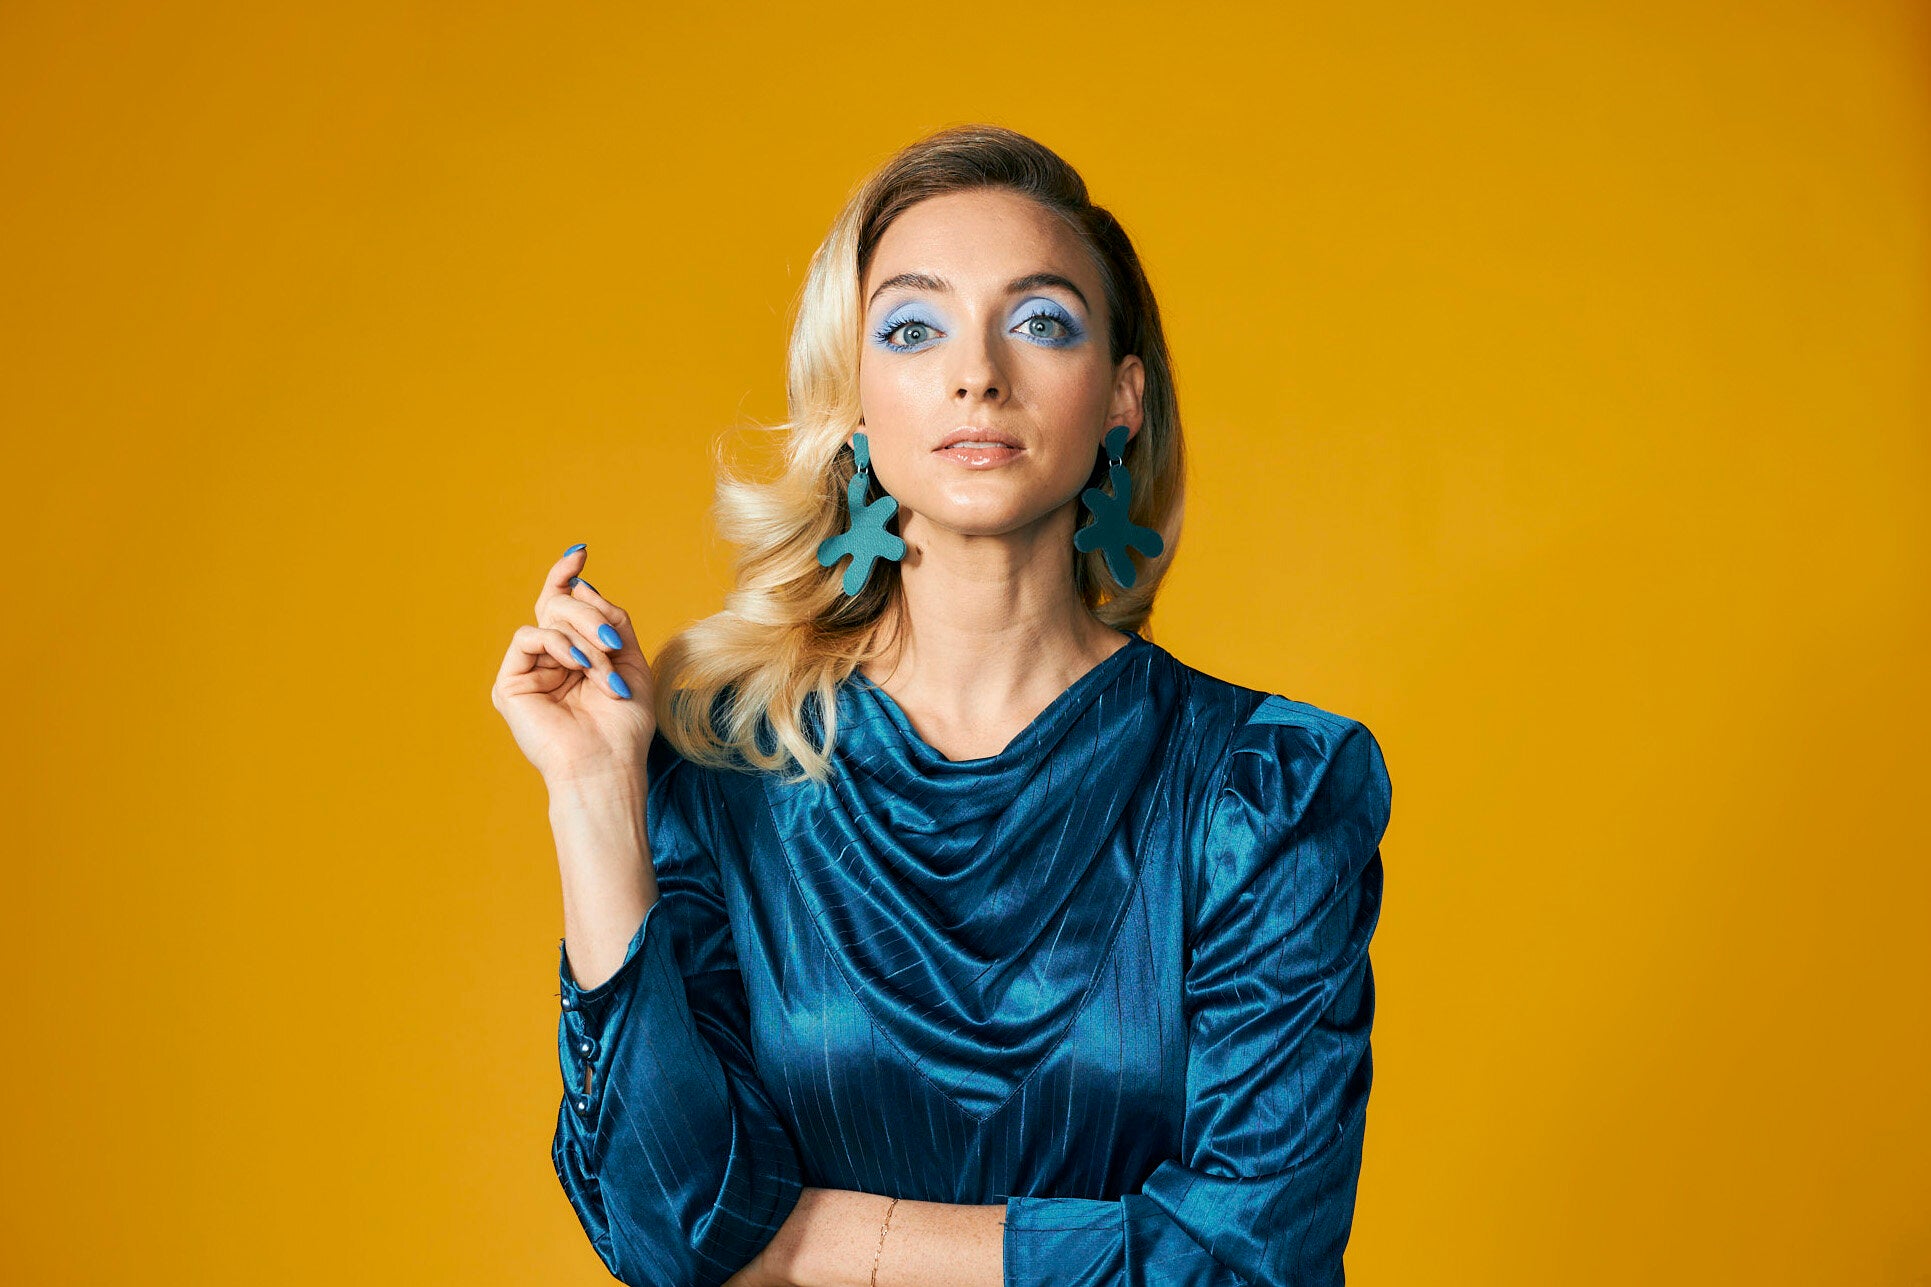 a blonde woman wears a monochromatic teal outfit with matching teal leather earrings against a yellow background.